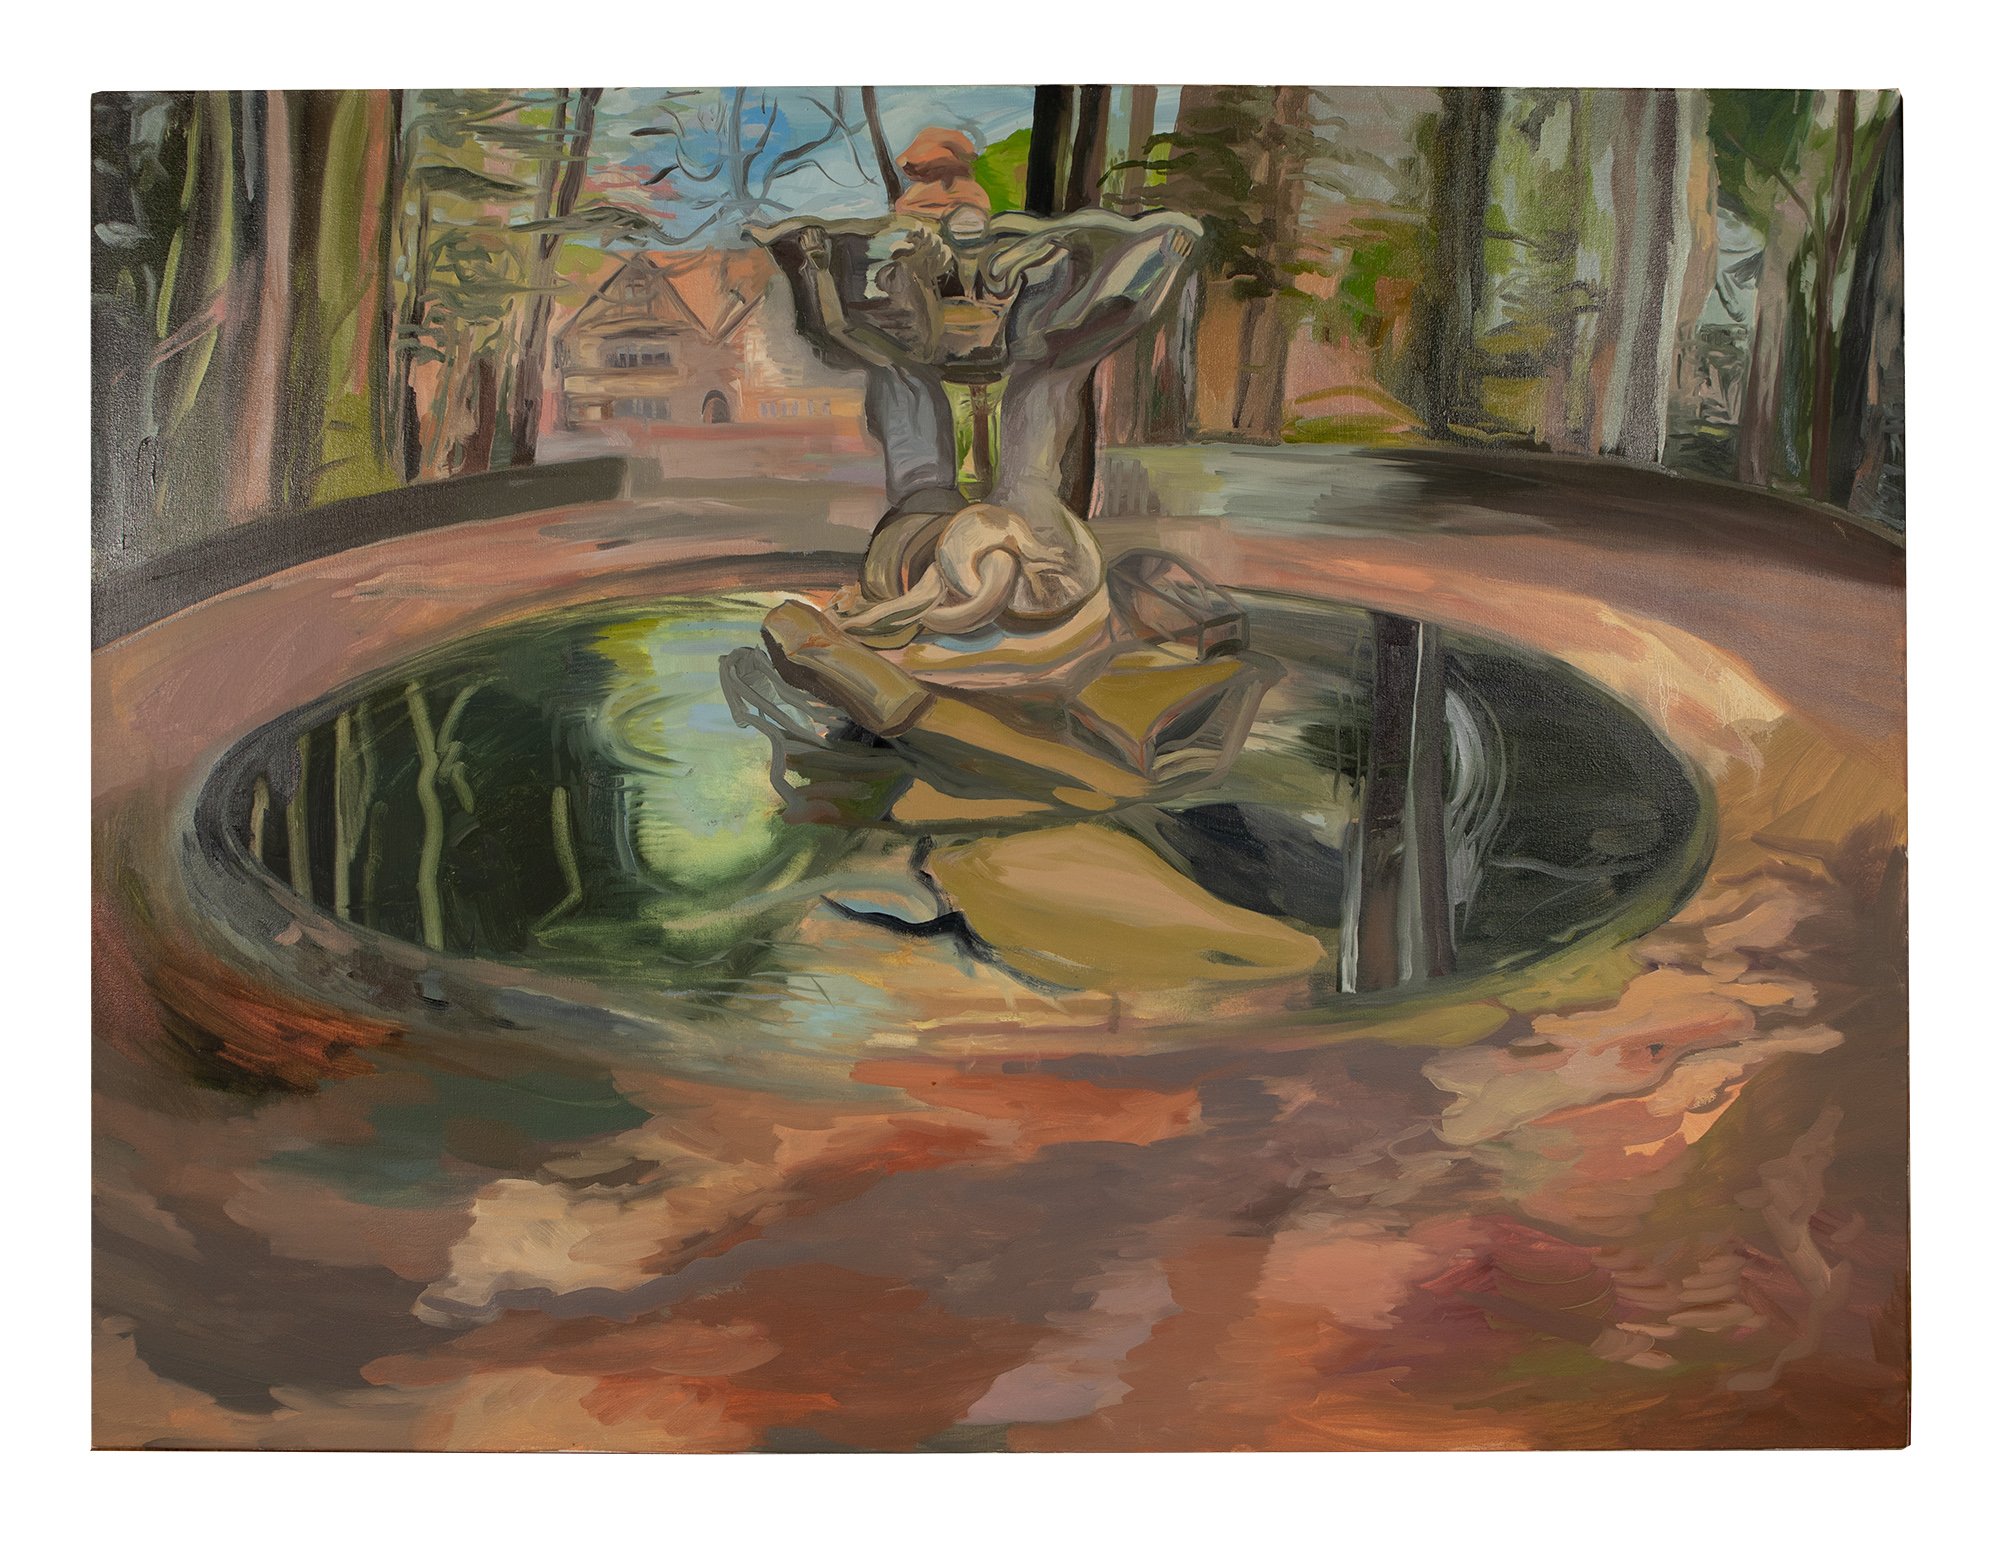  Fountain, 2021, oil on canvas, 36 x 50 inches